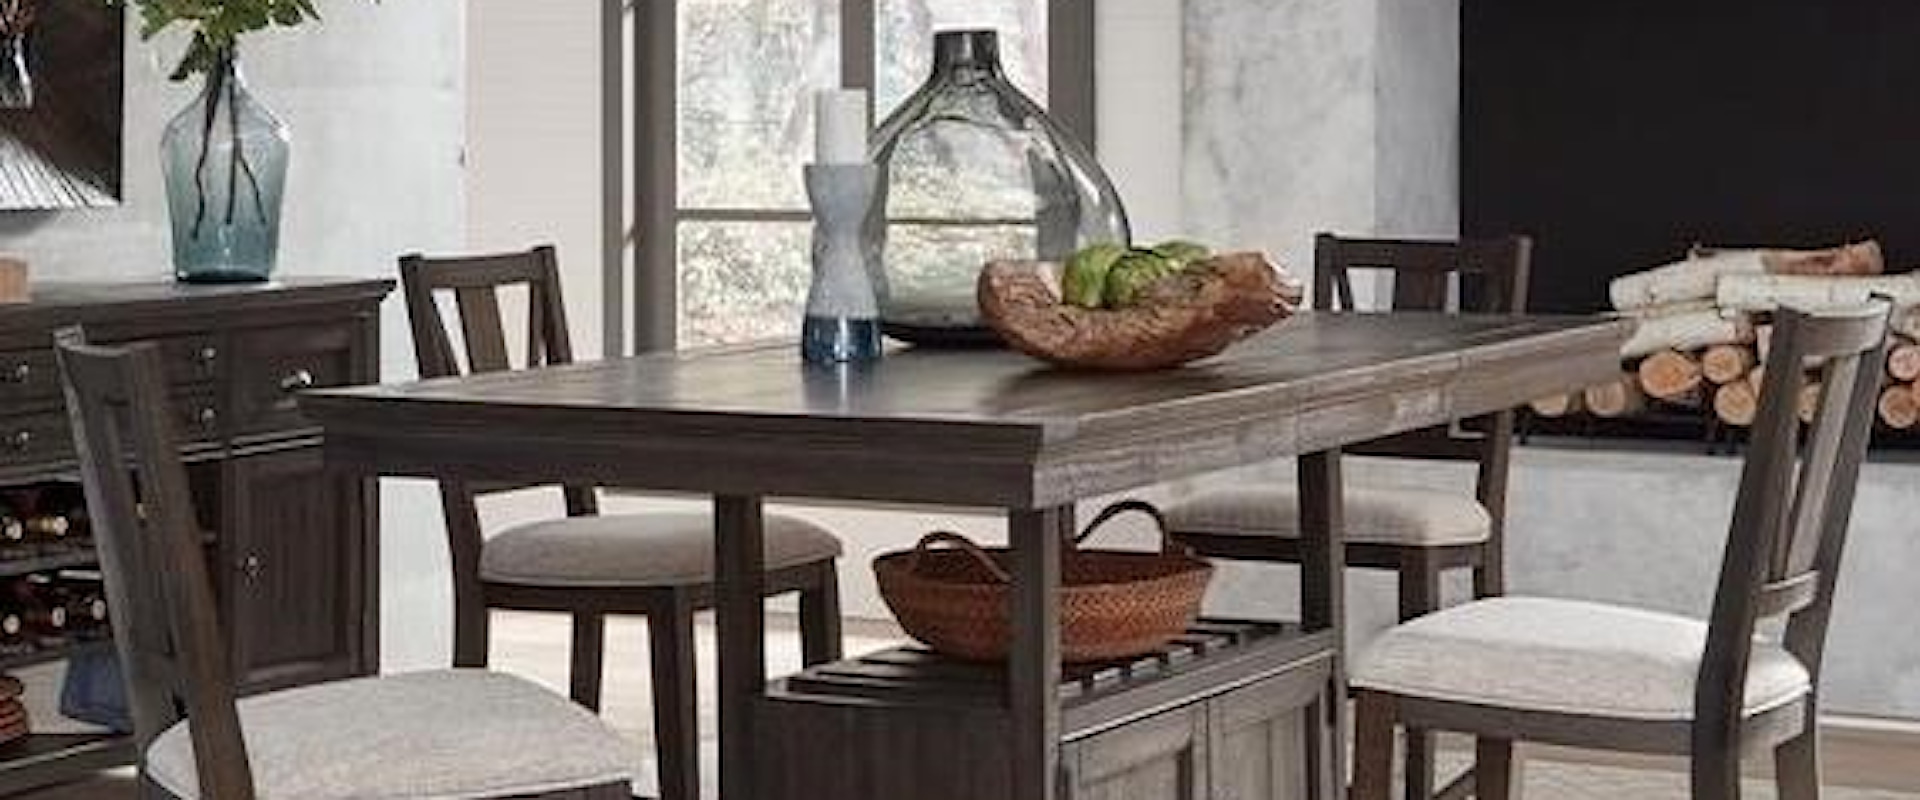 5-Piece Counter Height Dining Set with Storage